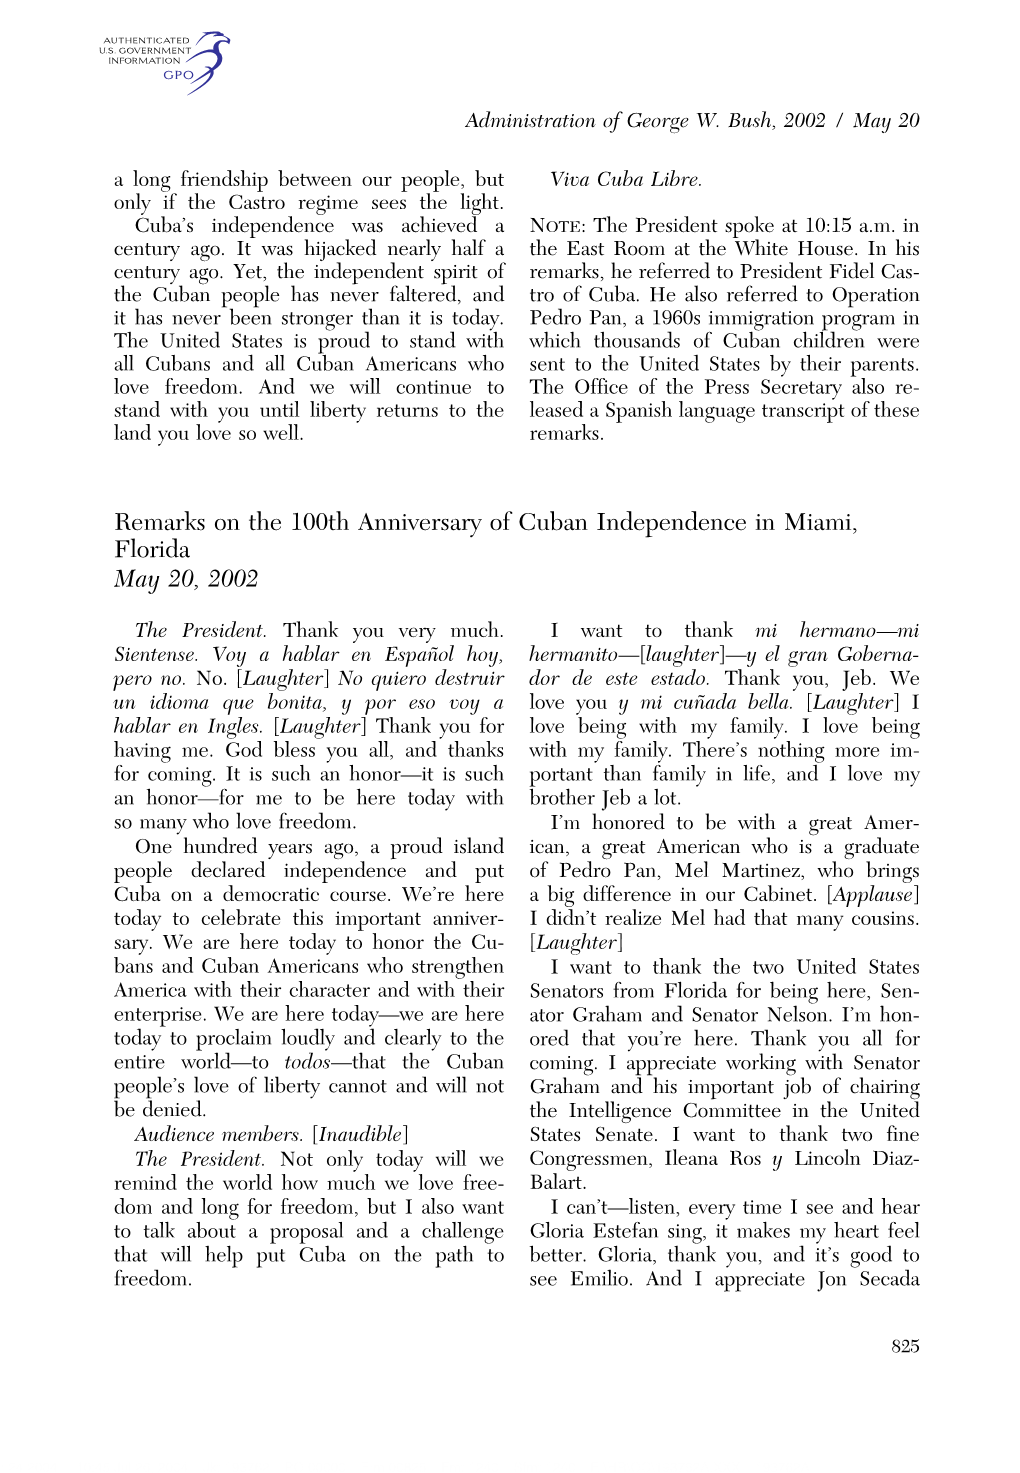 Remarks on the 100Th Anniversary of Cuban Independence in Miami, Florida May 20, 2002